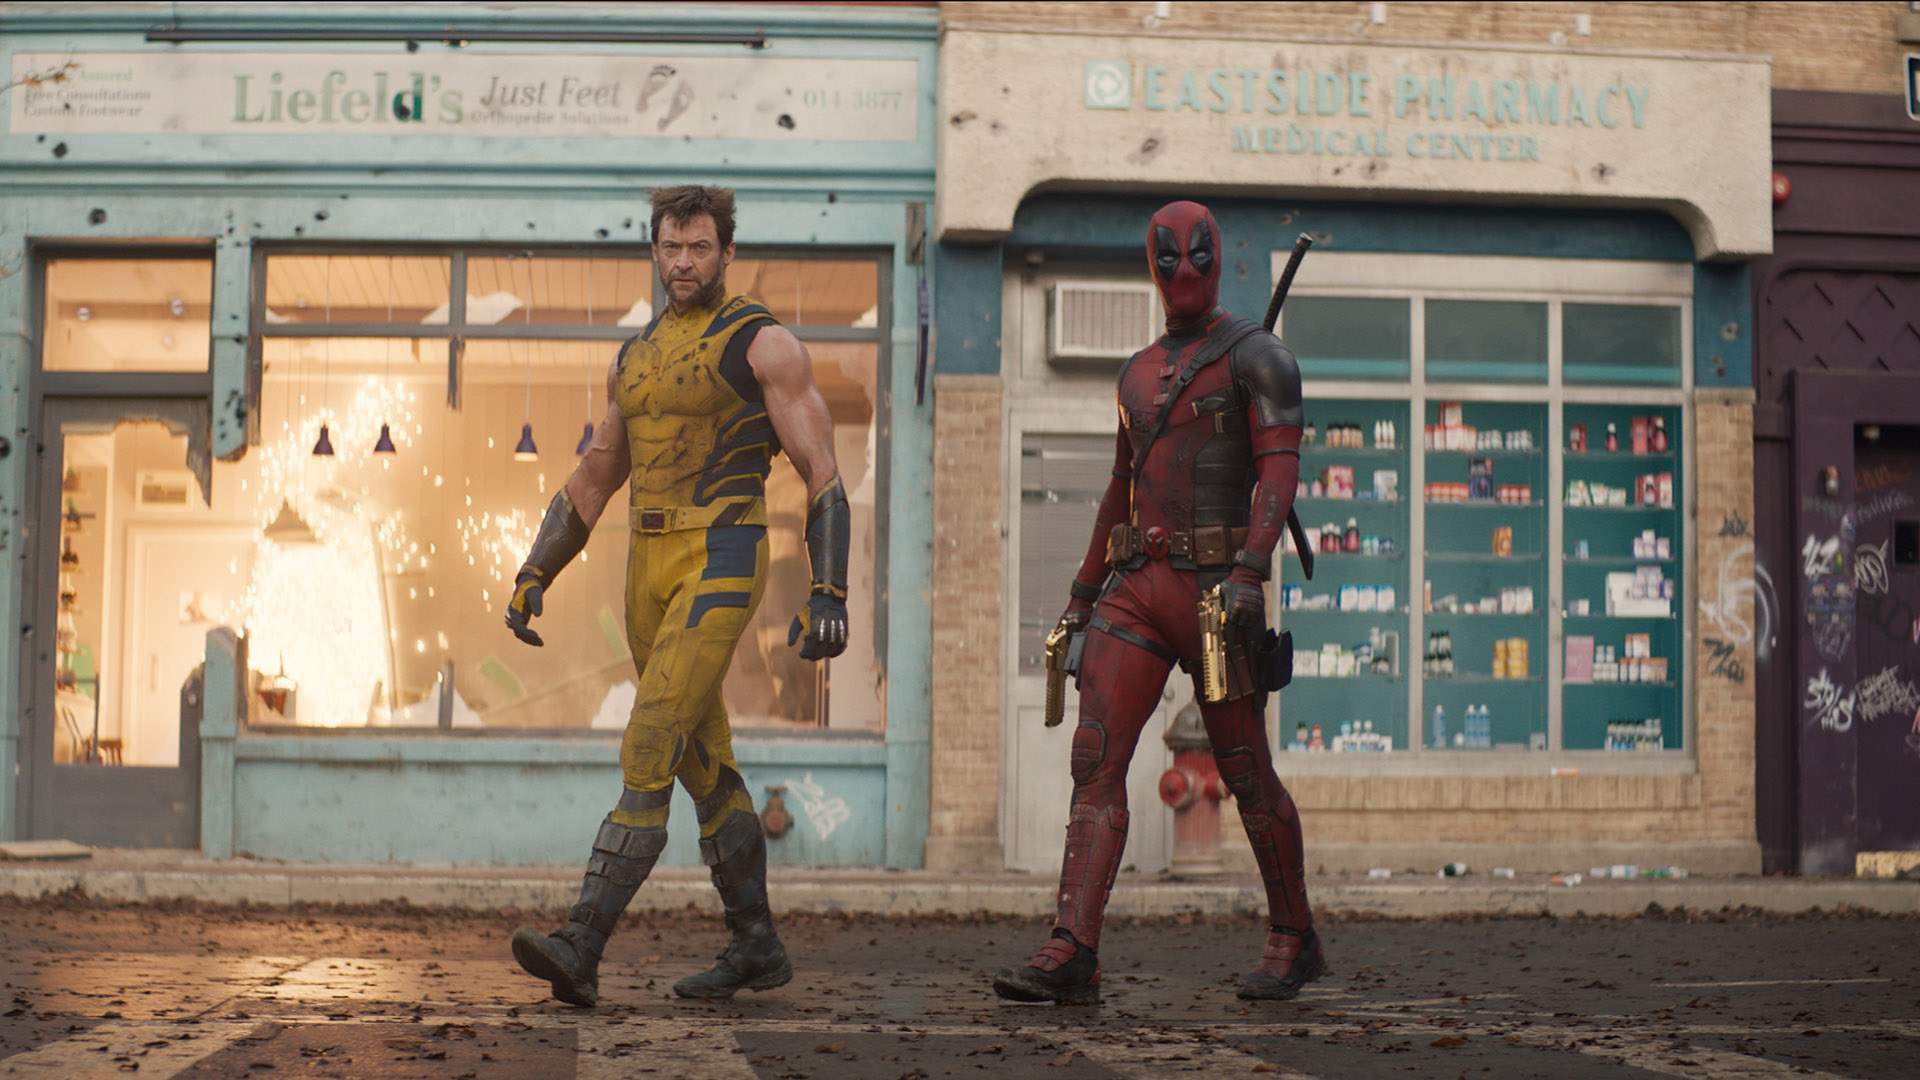 The Full 'Deadpool & Wolverine' Trailer Brings Ryan Reynolds and Hugh Jackman Together in the MCU